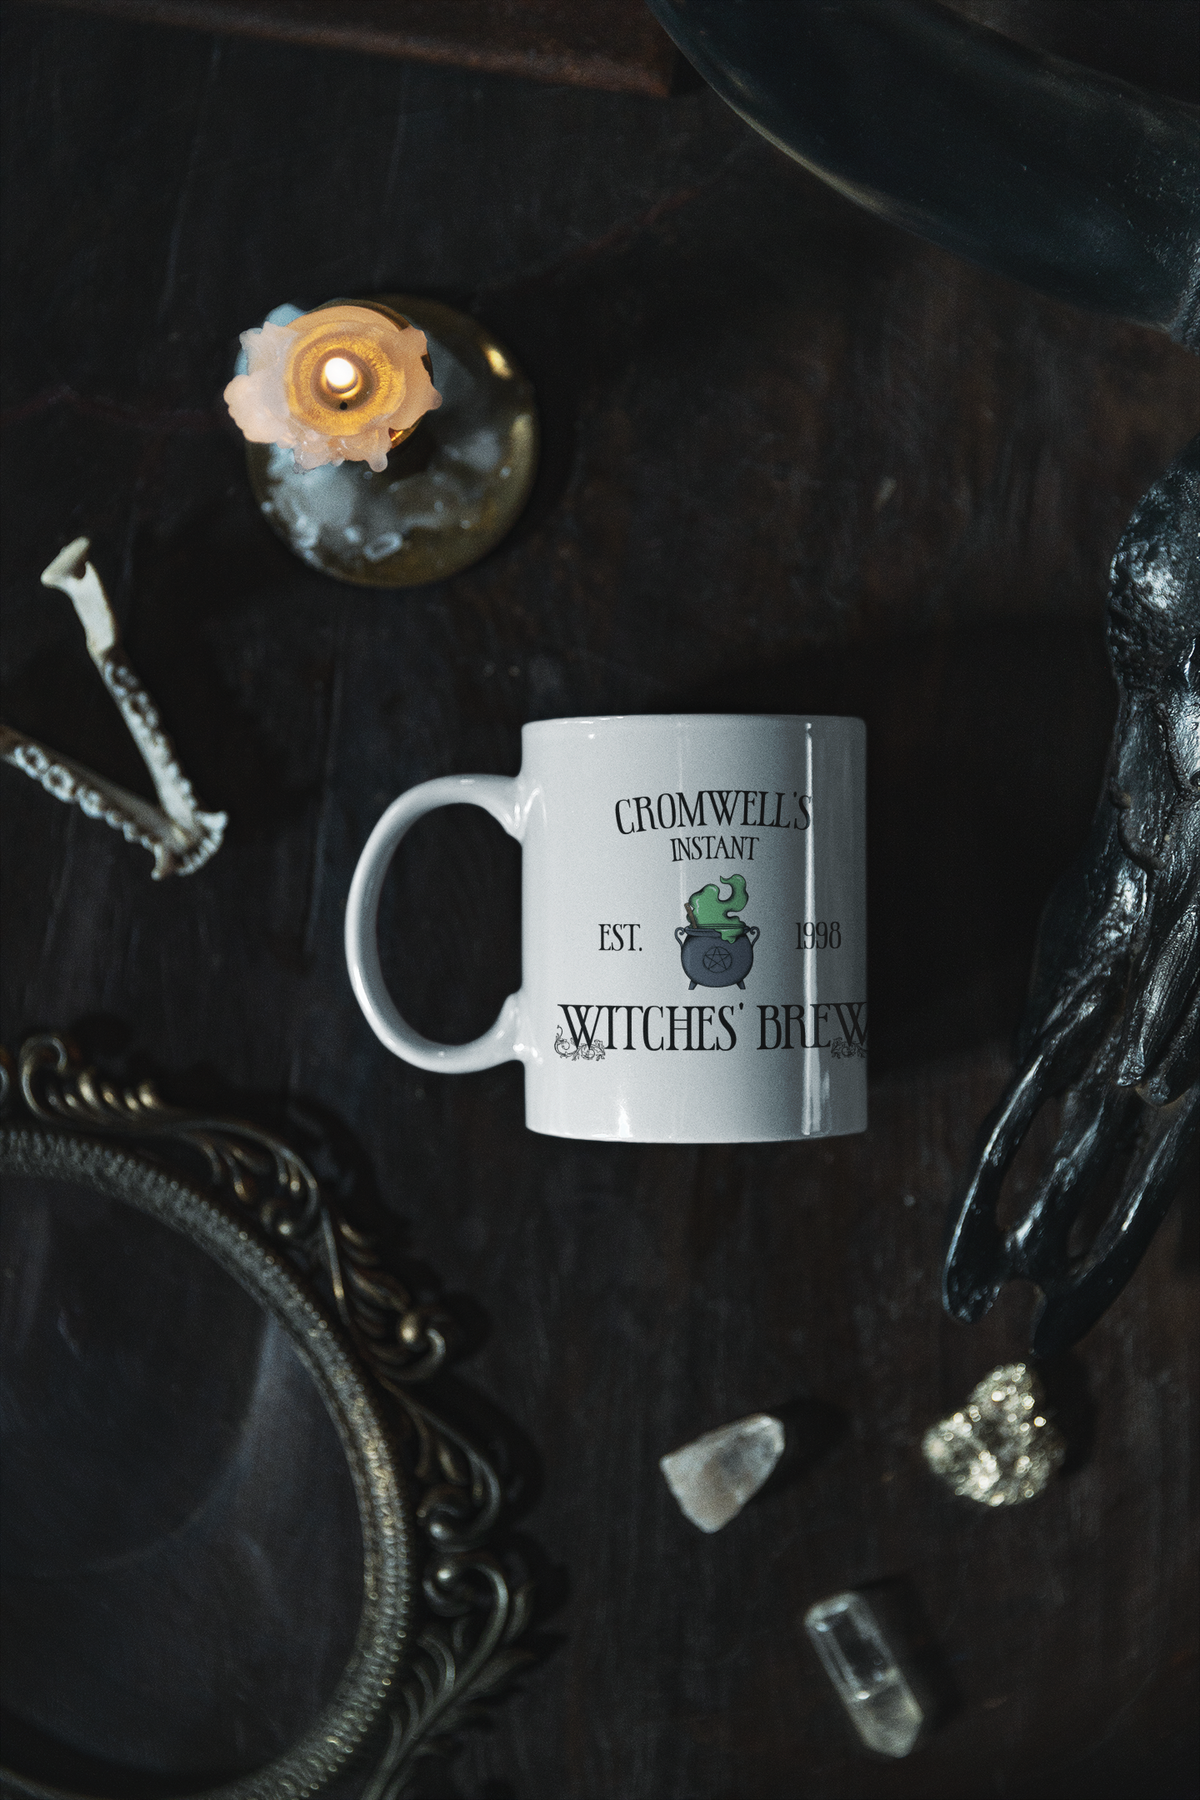 Cromwell's Instant Witches' Brew Mug